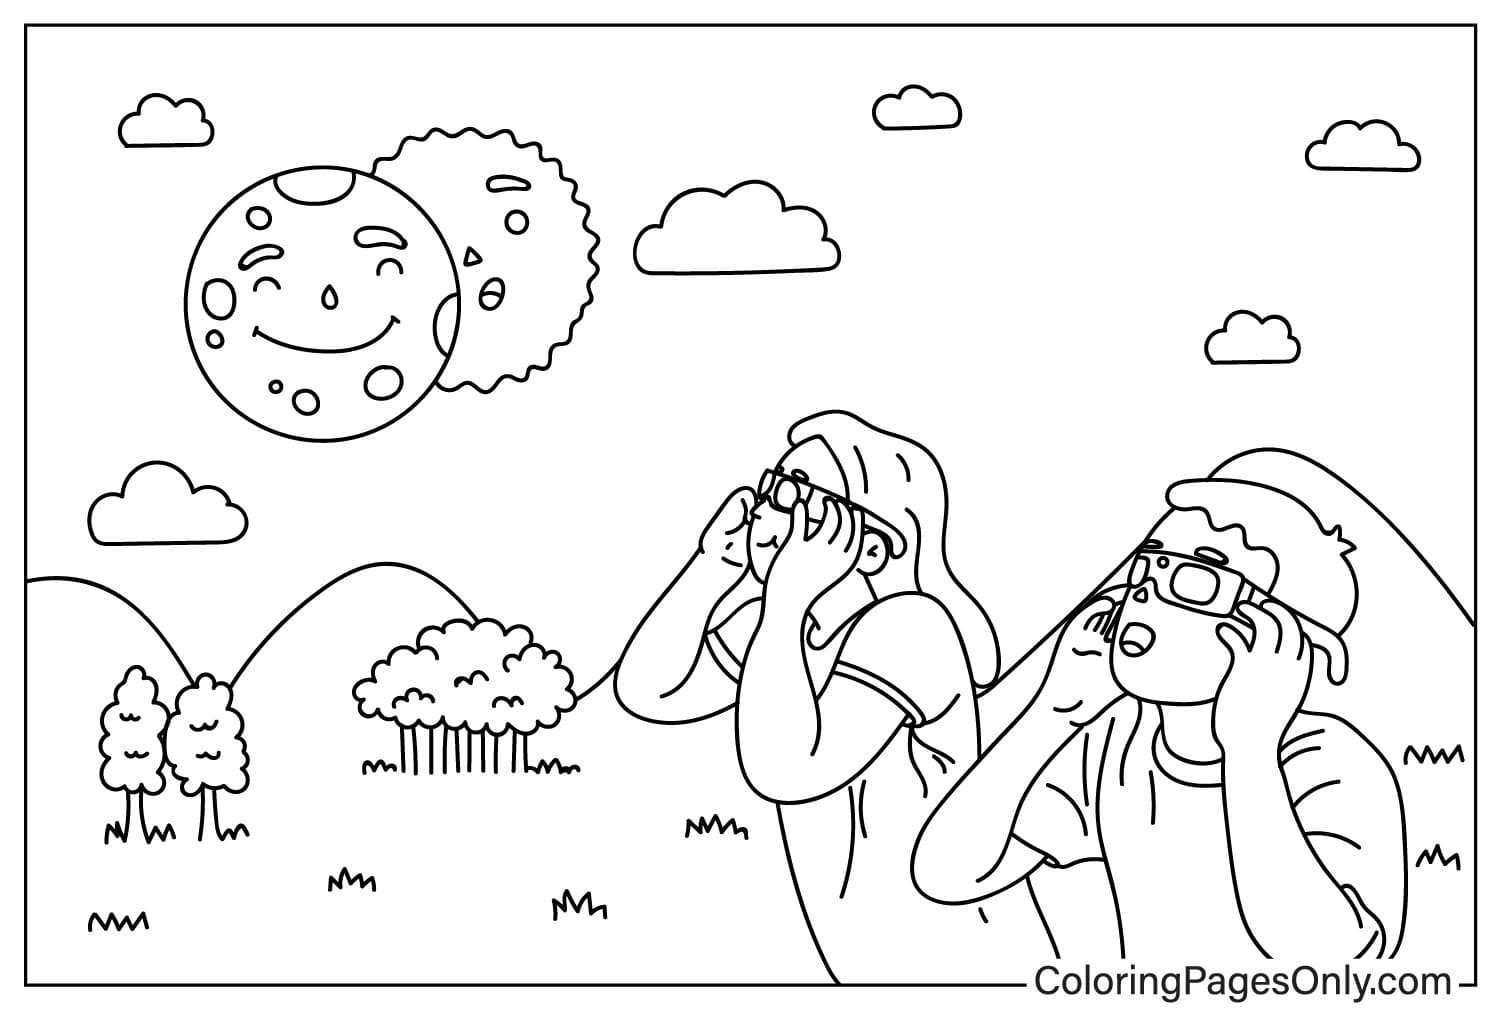 Eclipse Coloring Page to Print from Solar Eclipse